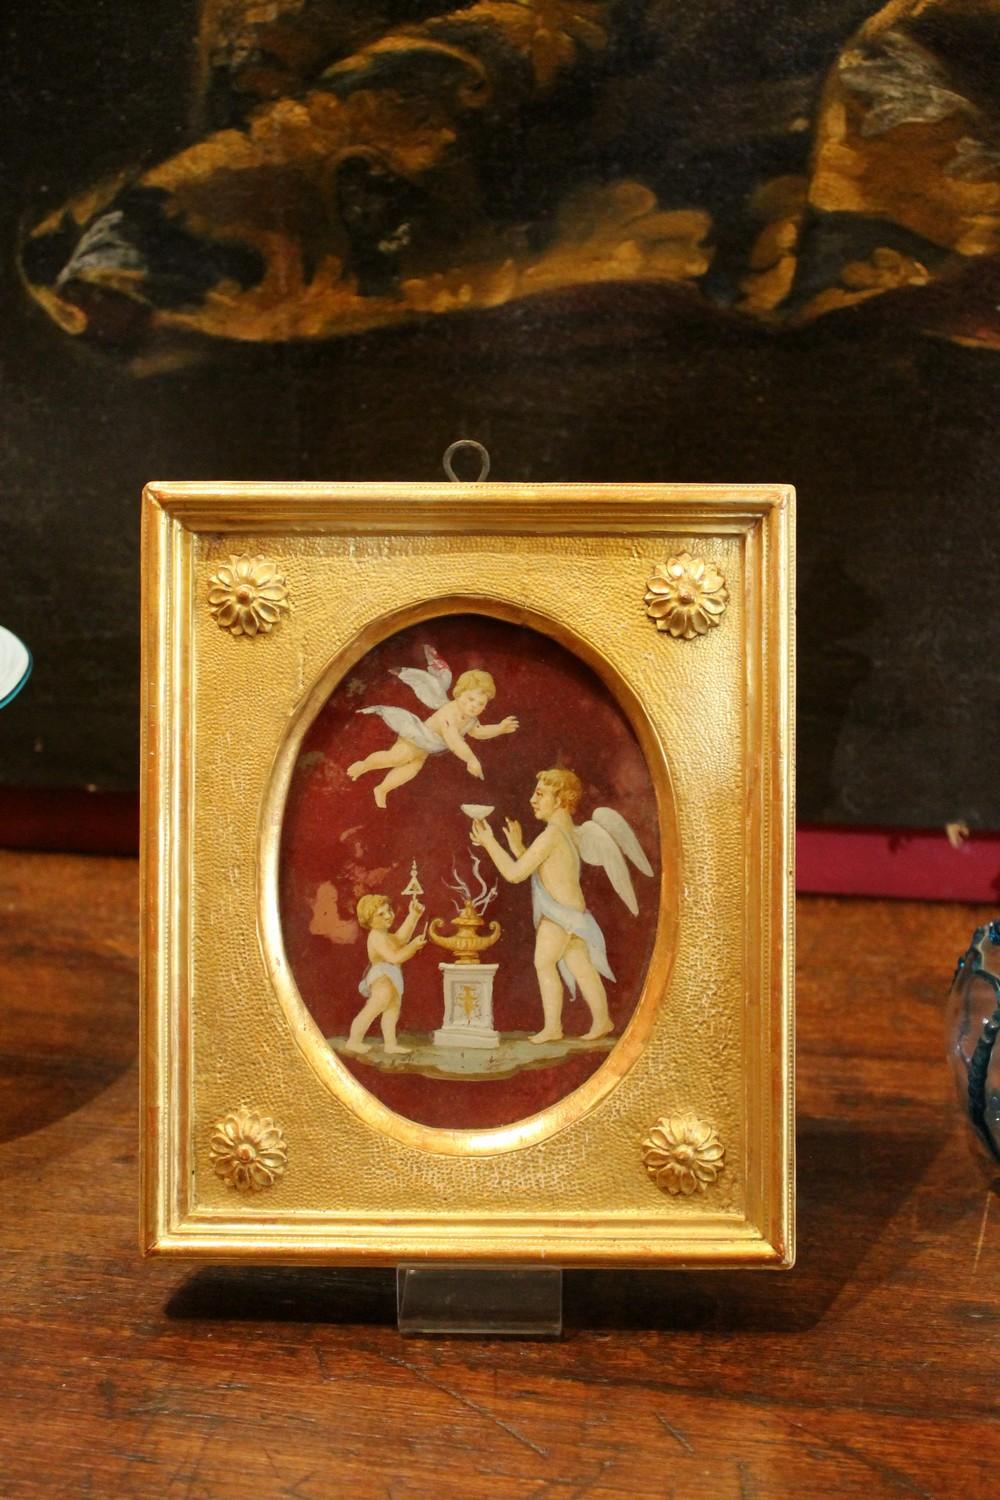 This lovely late 19th Century or turn of the century Italian oil painting on glass features a Neoclassical scene with putto.
The winged cherubs and the architectural elements are rendered in soft pastel tones while the background is red. Both the